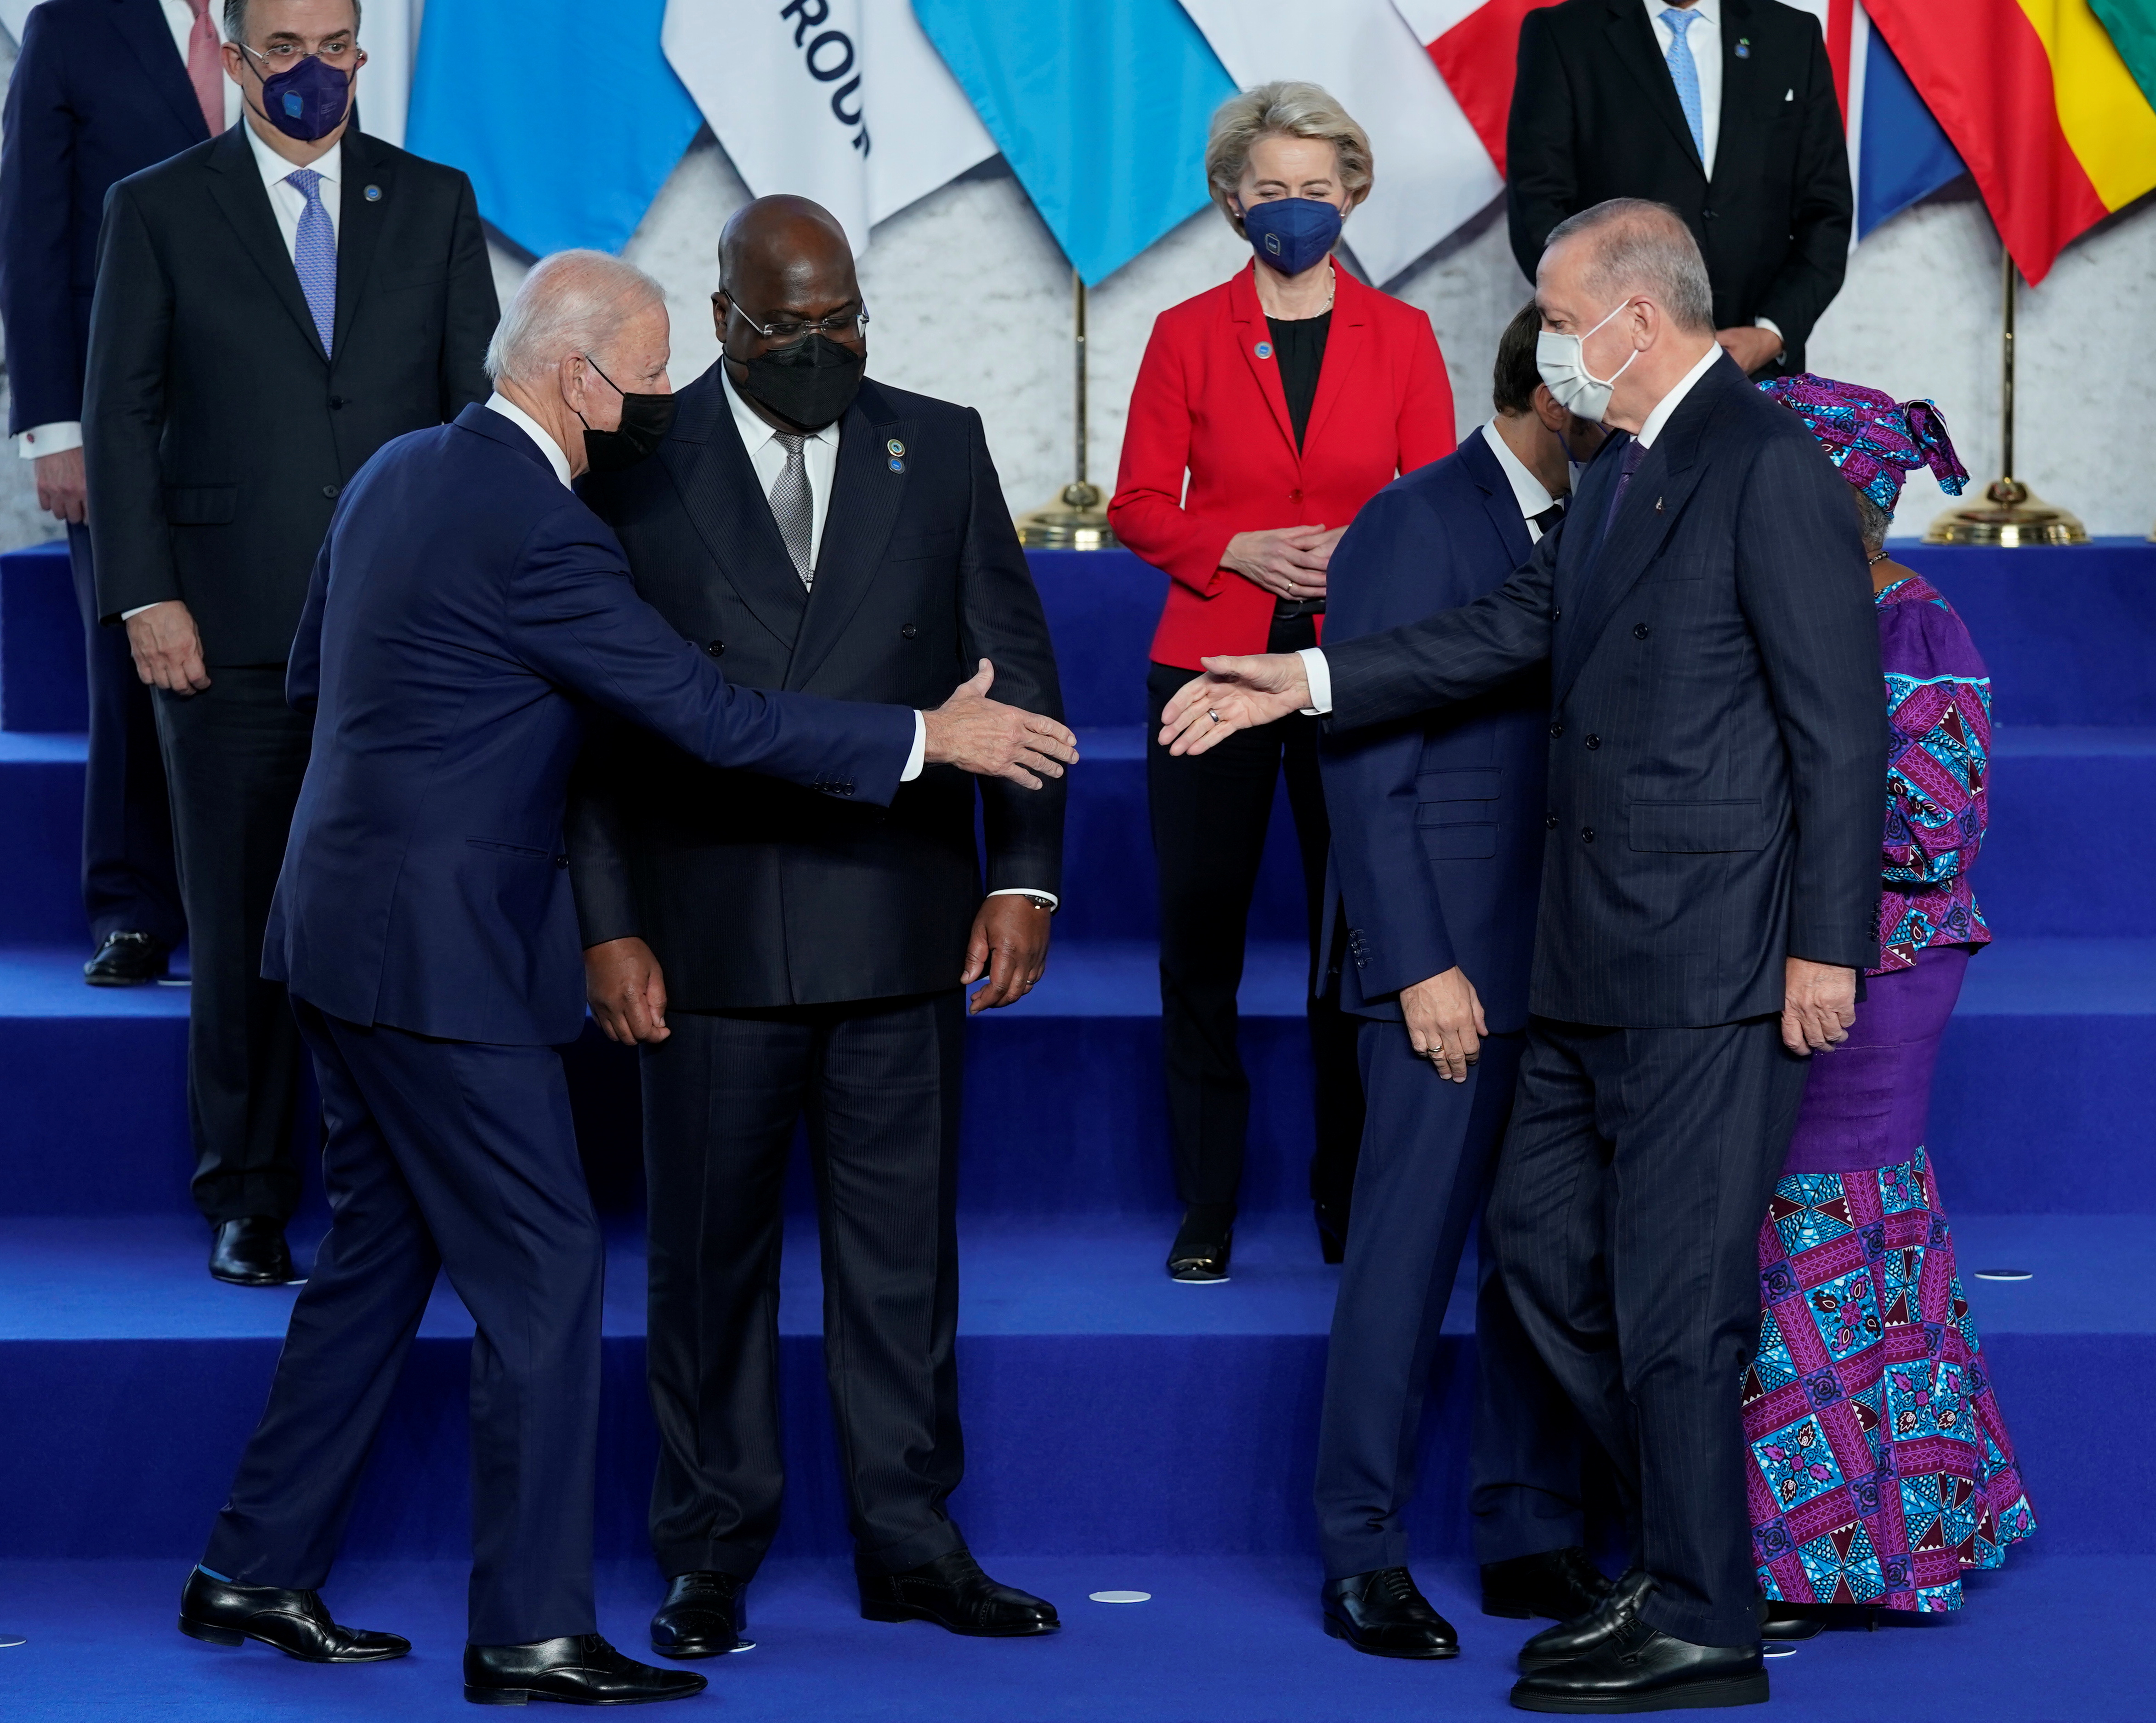 U.S. President Joe Biden reaches out to shake hands with Turkey's President Recep Tayyip Erdogan during a group photo at the G20 summit in Rome, Italy October 30, 2021. Evan Vucci/Pool via REUTERS